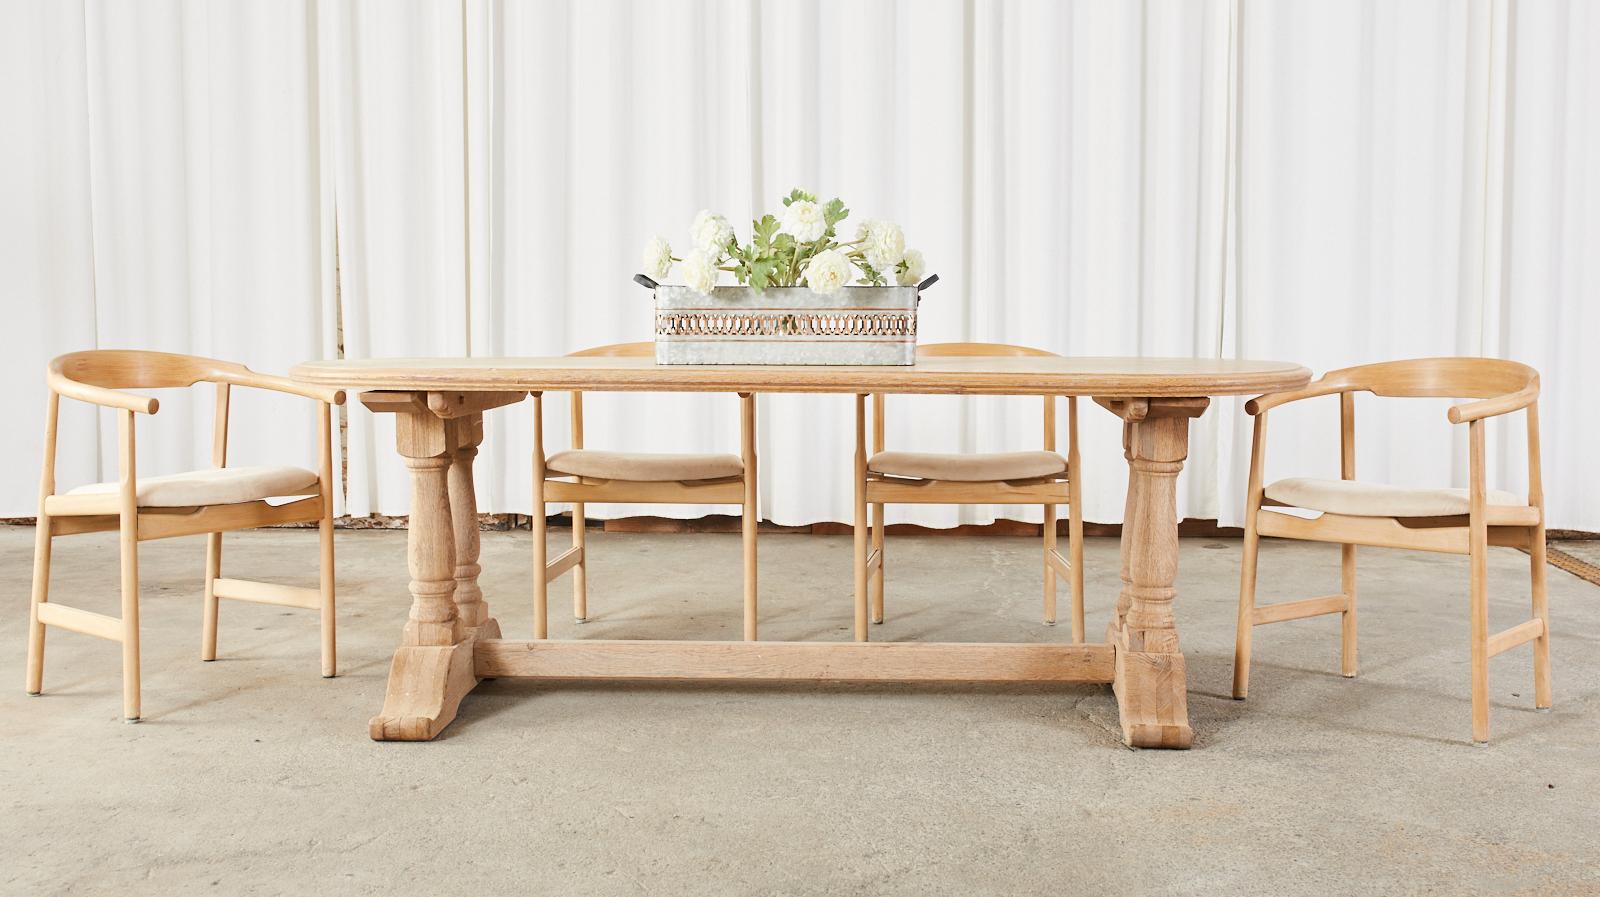 Substantial country French trestle dining table featuring a bleached oak finish. Heavy and solid crafted from solid oak with a nearly 2 inch thick plank top in an elongated oval form. Constructed with wood peg joinery the top is supported by double